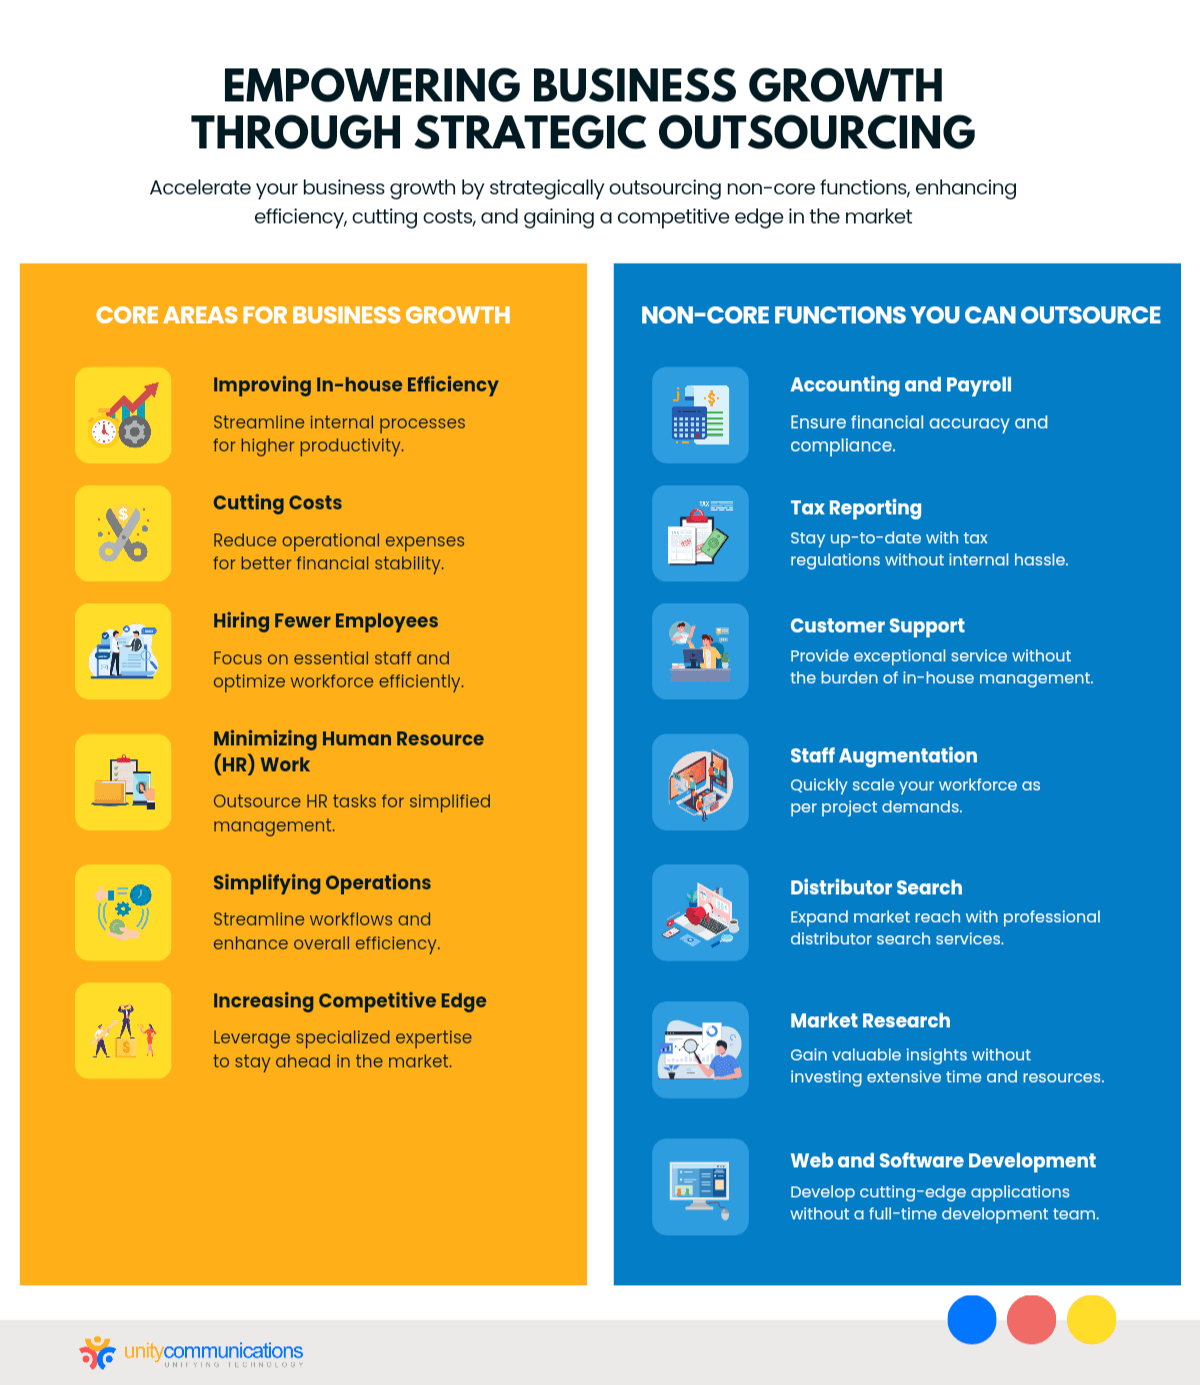 Empowering Business Growth through Strategic Outsourcing